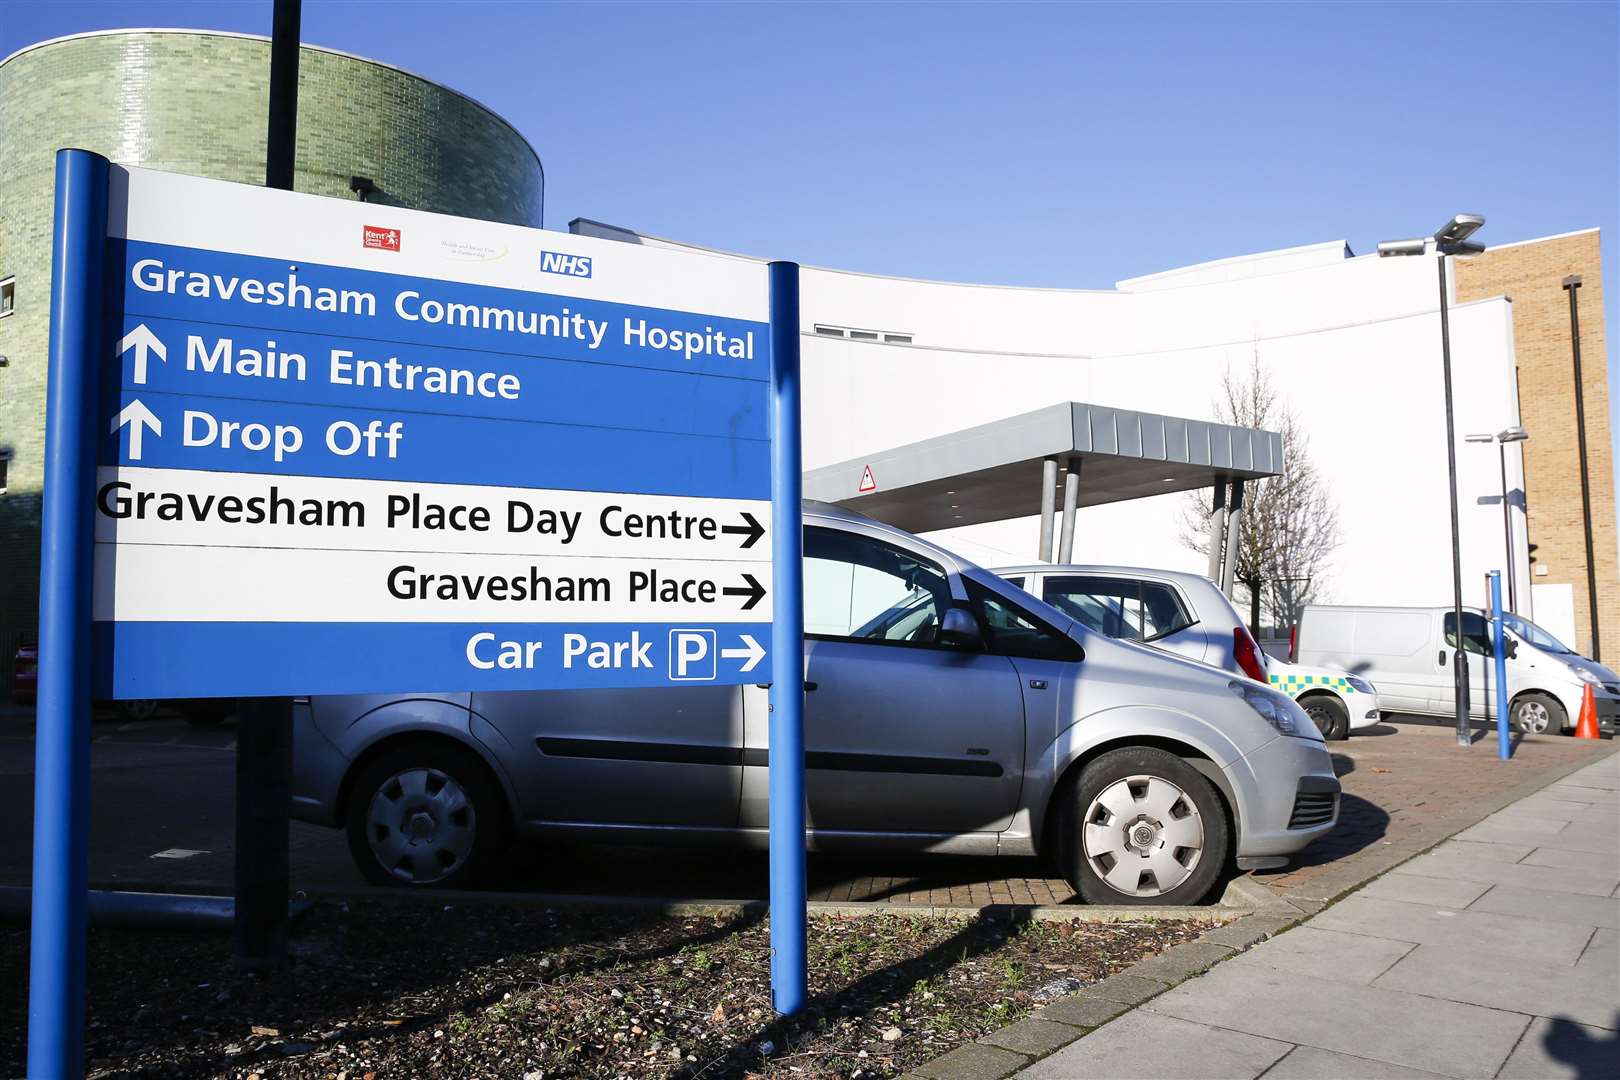 One of the options includes moving some urgent services to the community hospital in Gravesham